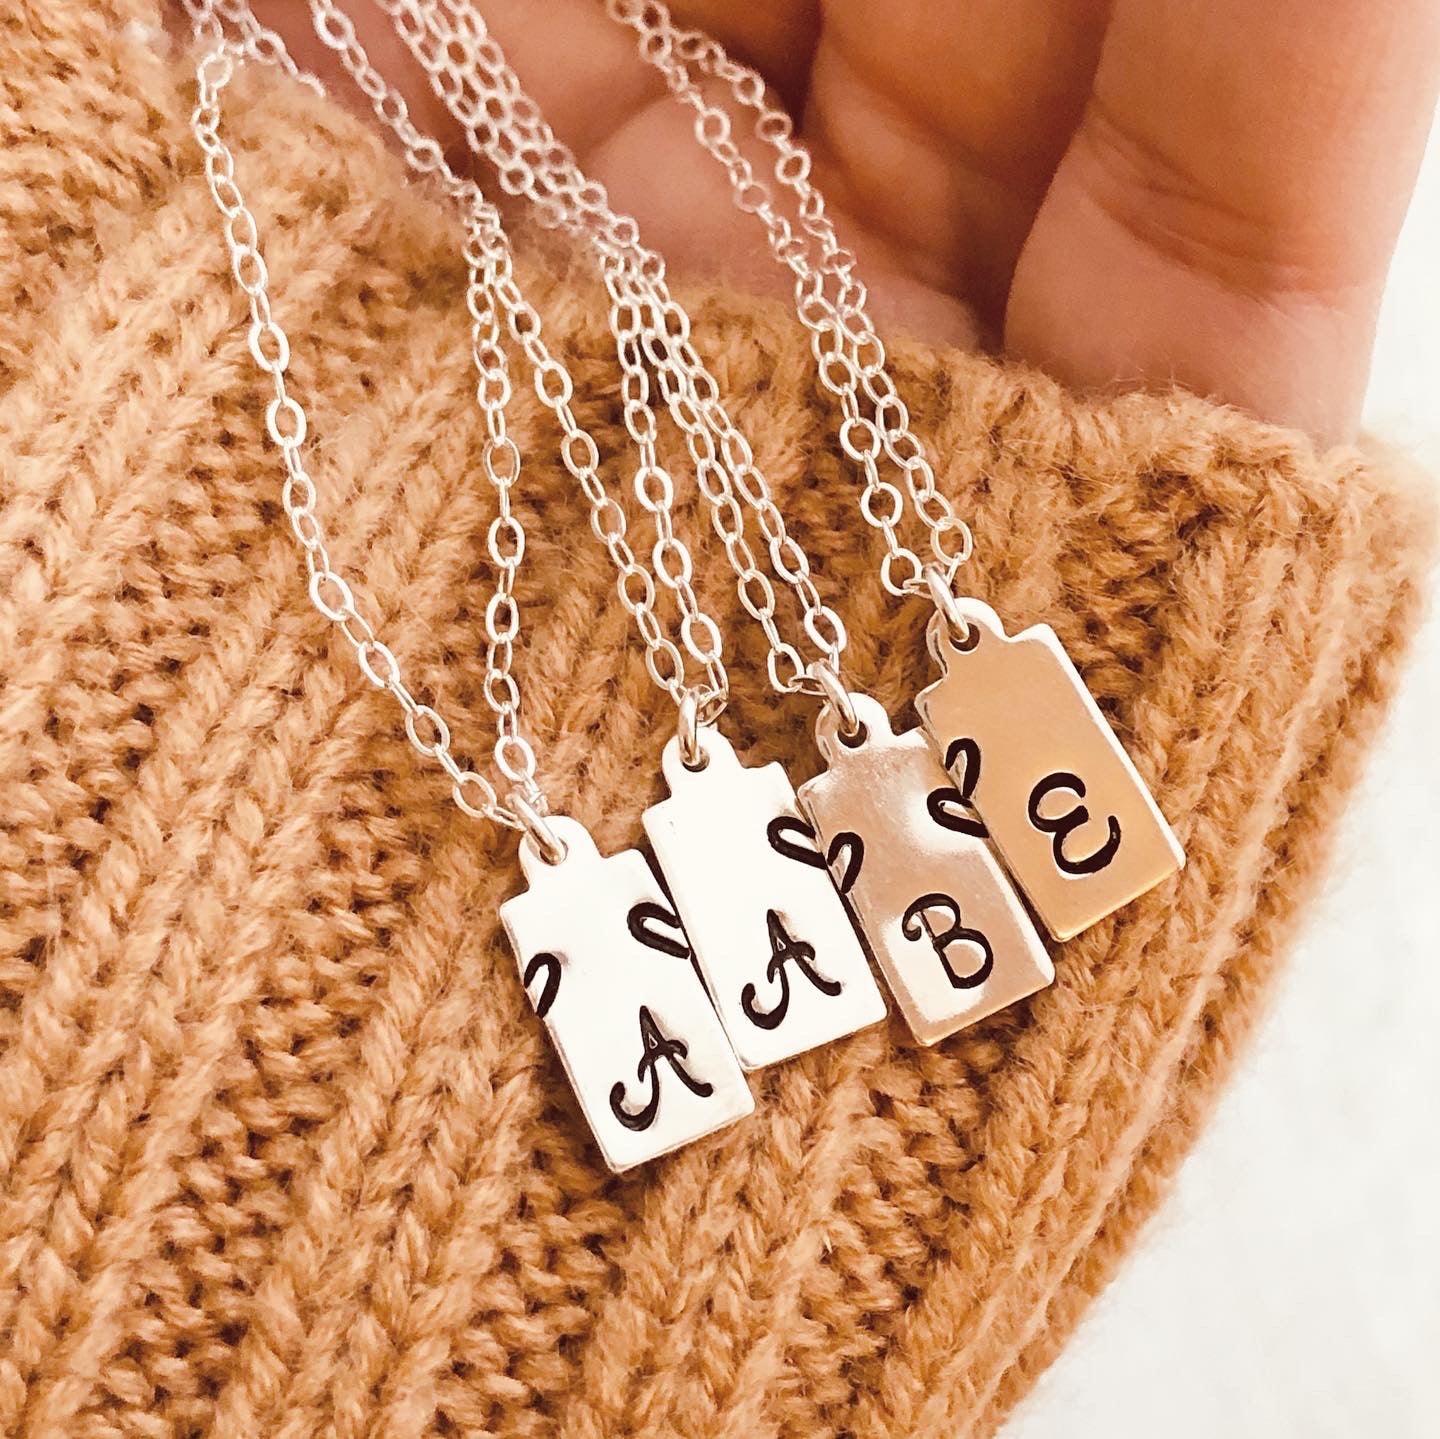 Friendship Necklace Set - Matching Necklaces Gold Set of 4